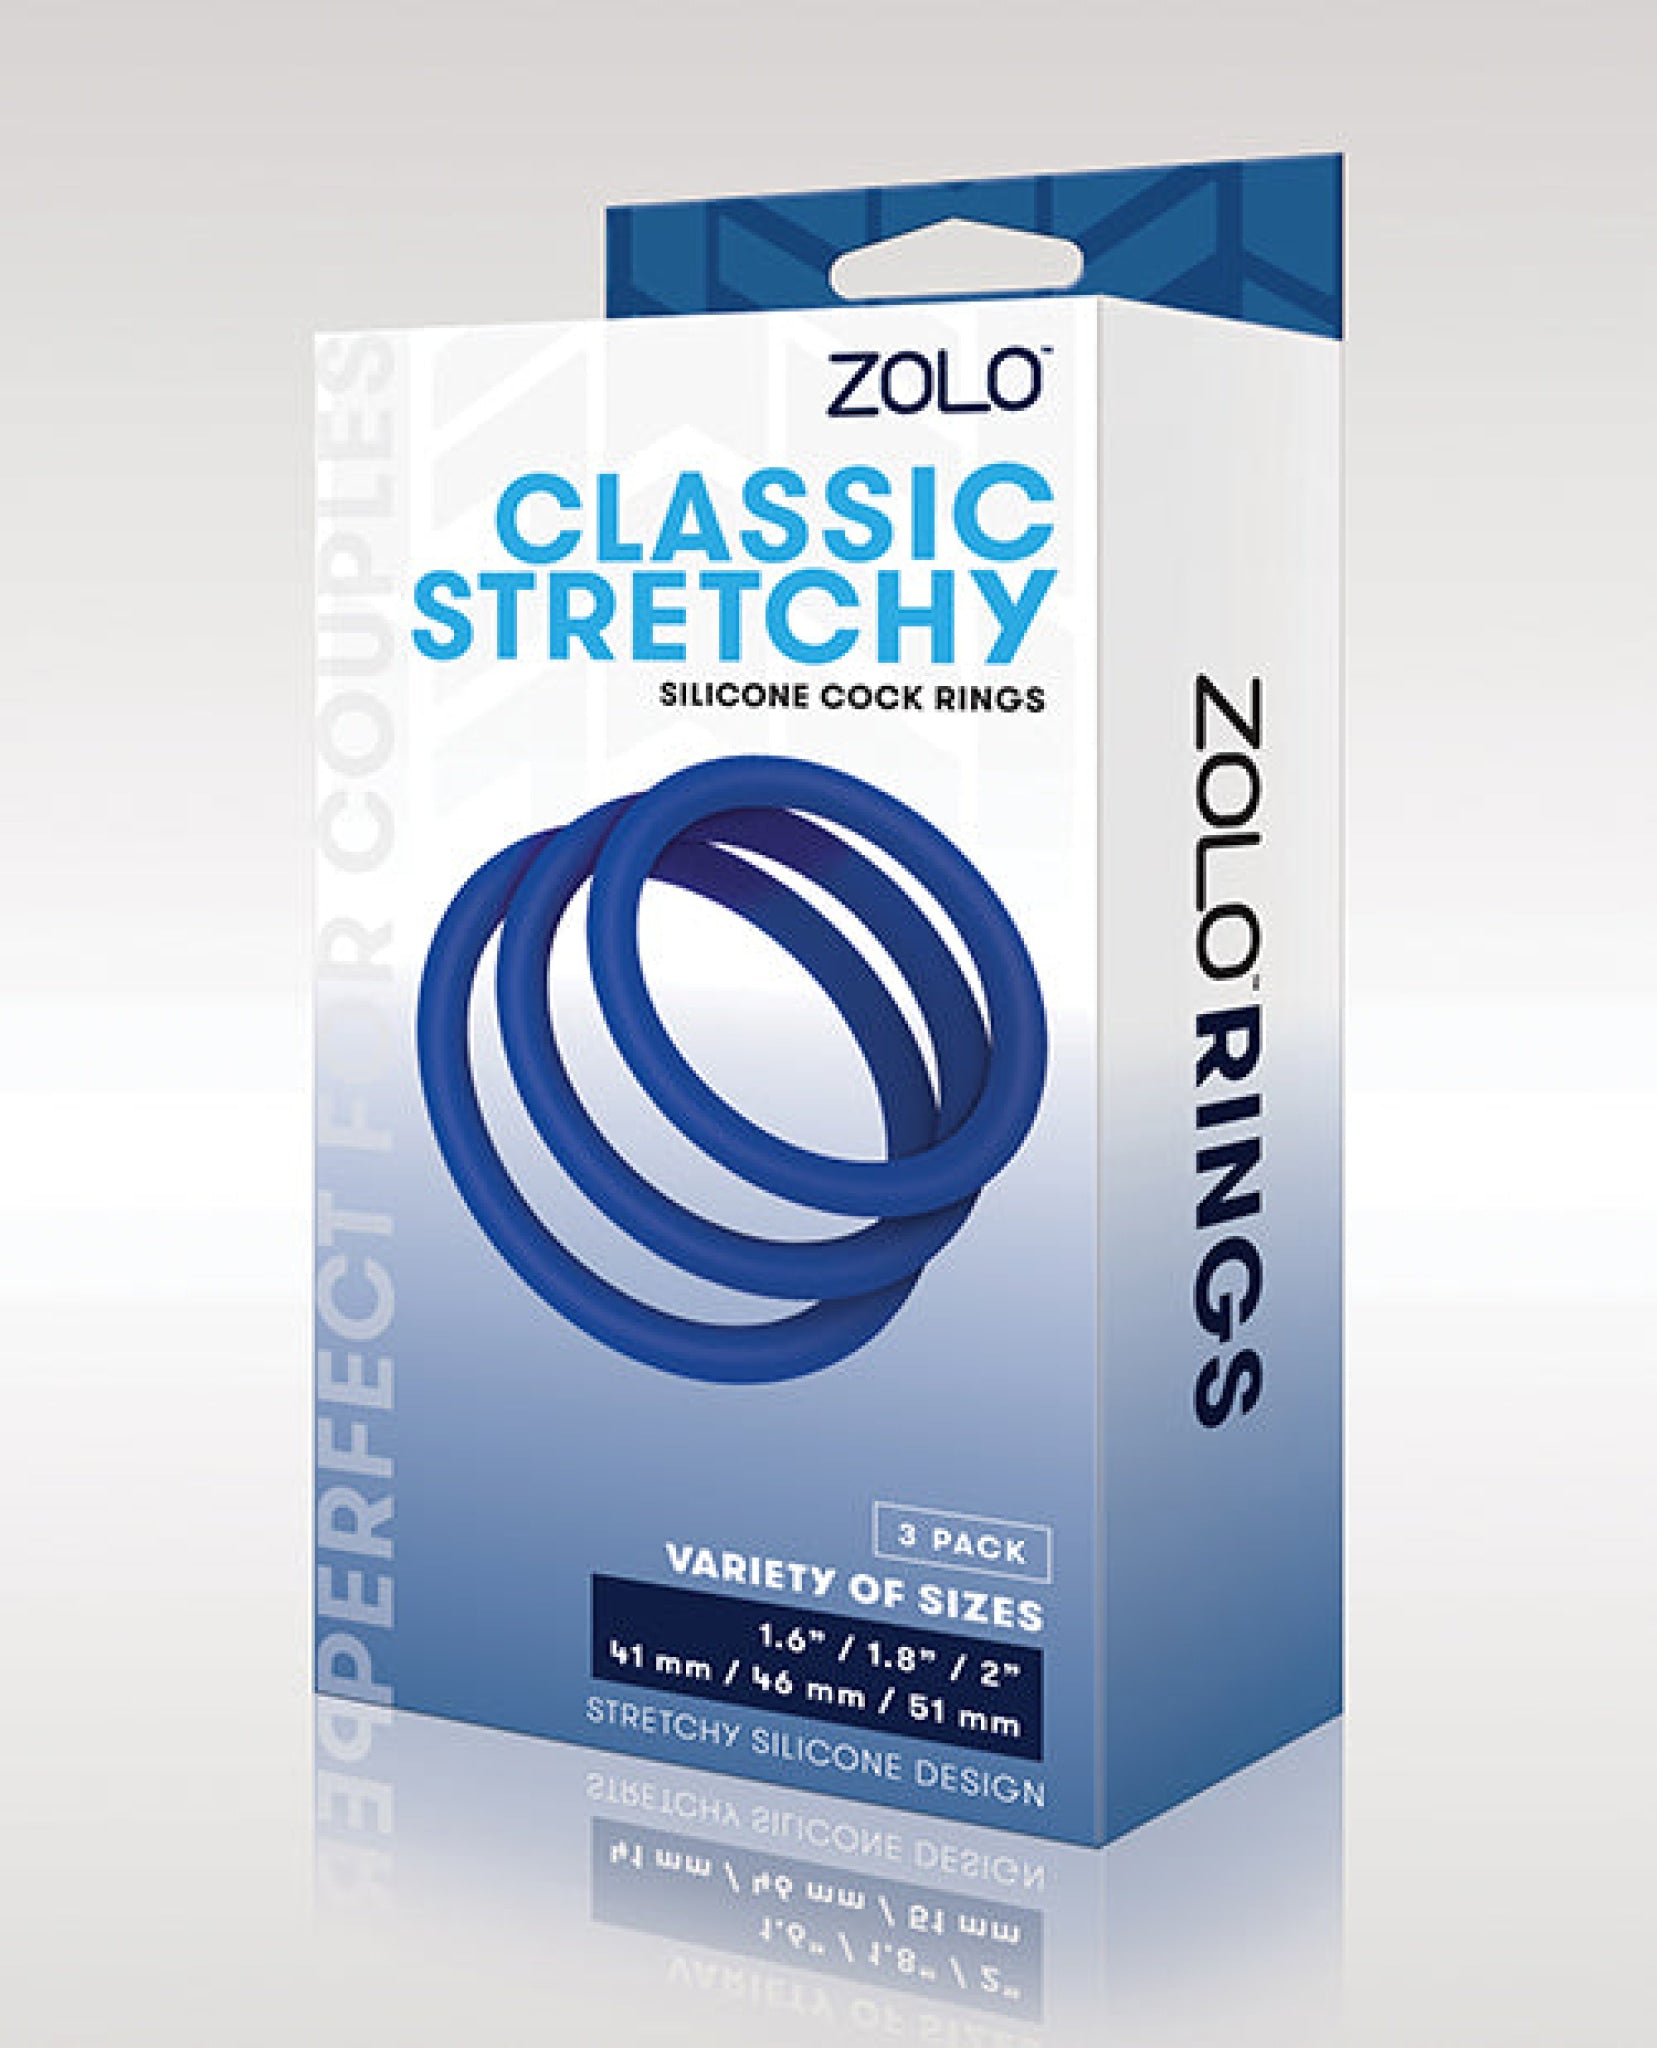 Zolo Stretchy Silicone Cock Rings - Blue Zolo™